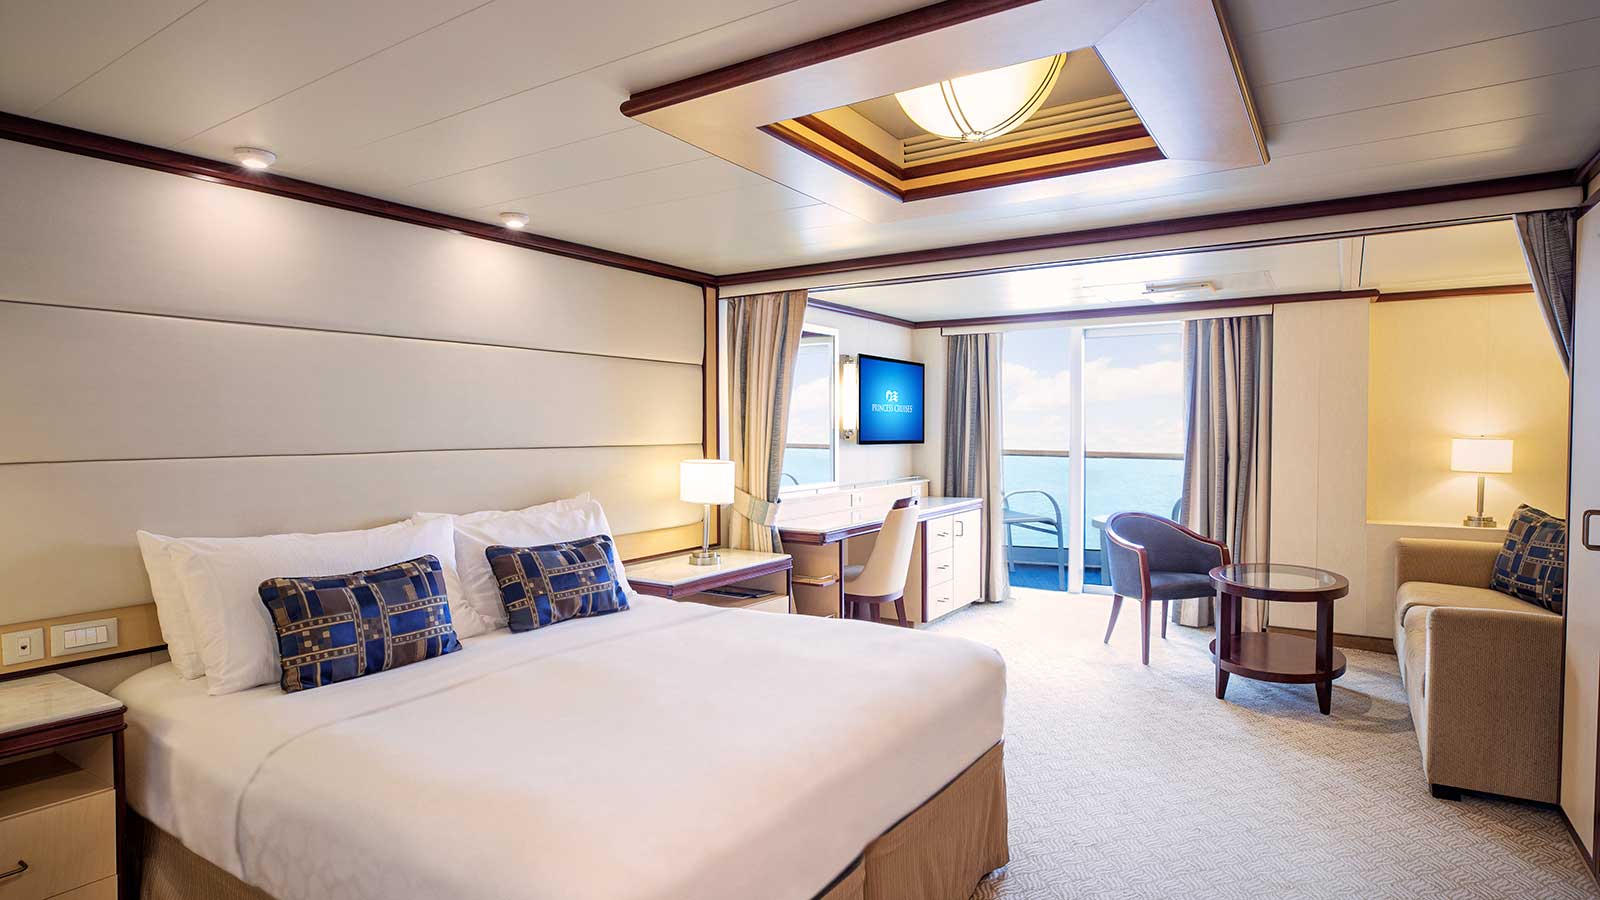 Image of Accessible Accommodation, sourced from: Princess Cruise Lines https://www.princess.com/images/global/ships-and-experience/ships/products/staterooms/royal-class-wheelchair-accessible-1600.jpg